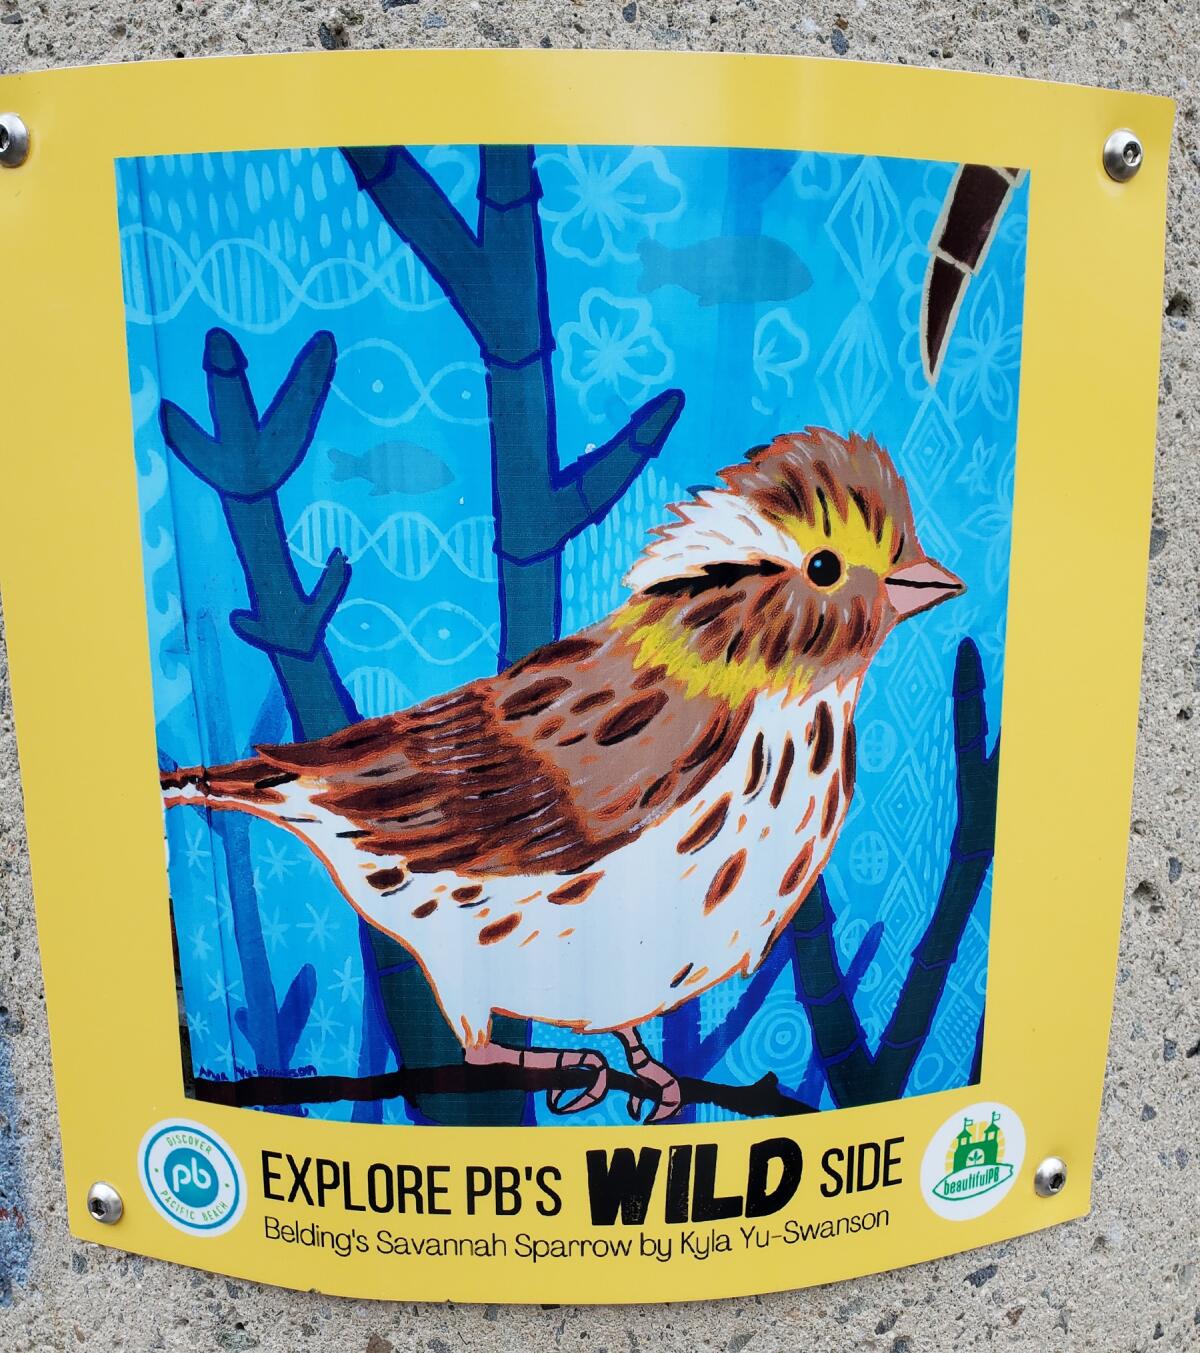 Belding’s Savannah sparrow, designed by Kyla Yu-Swanson as part of a mural on the UCSD Kendall-Frost Marsh trailer.